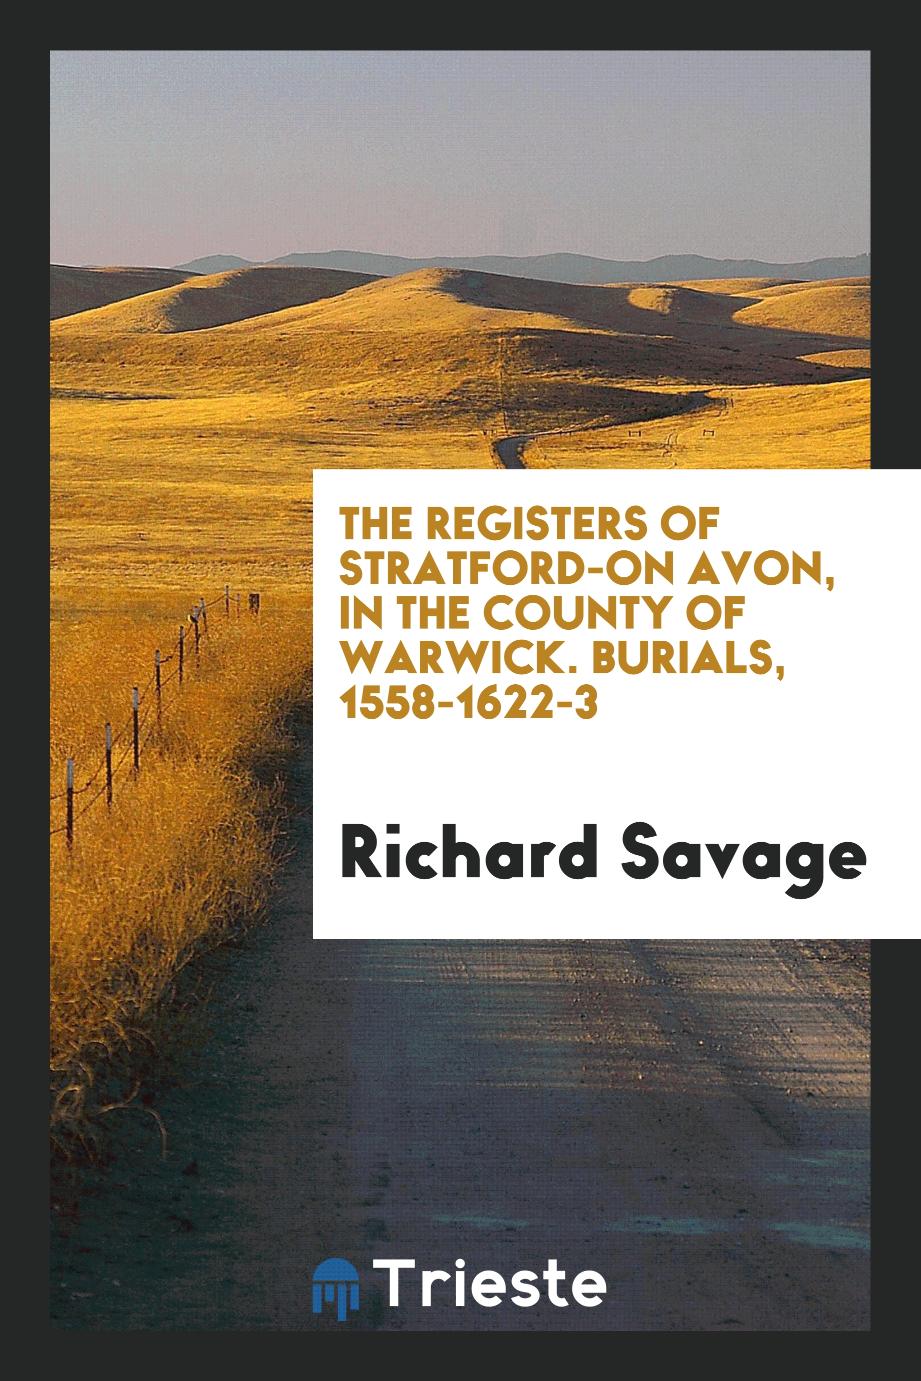 The registers of Stratford-on Avon, in the county of Warwick. Burials, 1558-1622-3